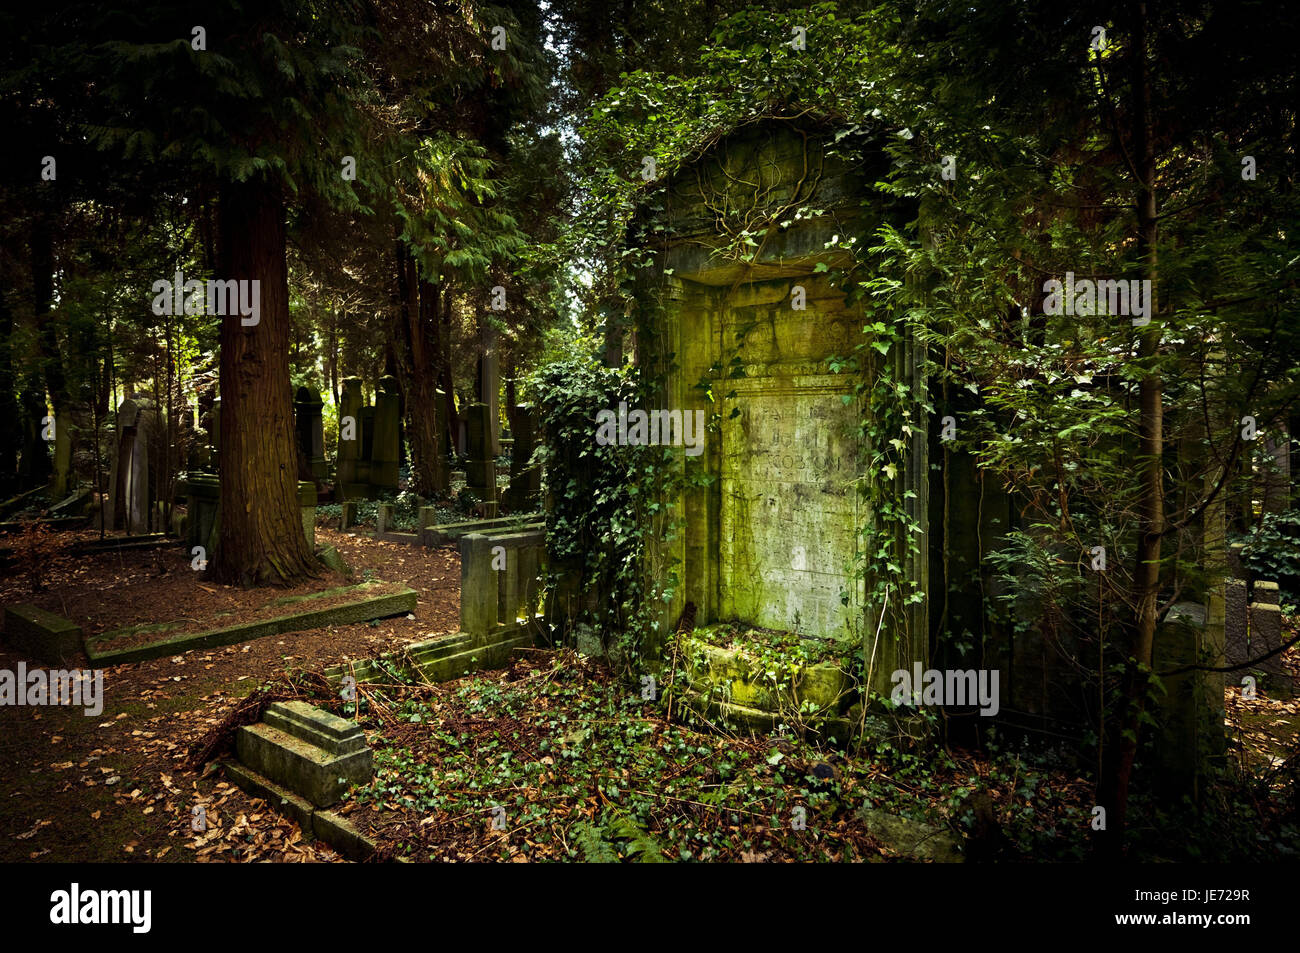 Germany, Hamburg, village Ohls, cemetery, tomb, runs wild, in 1883, burial ground, recollection, cemetery, memory, memory cemetery, faith, tomb, nobody, main cemetery, hope, Jewish, nature, park, park, park cemetery, religion, rest, death, old, offences, transitoriness, quietly, Hamburg-Ohlsdorf, Stock Photo